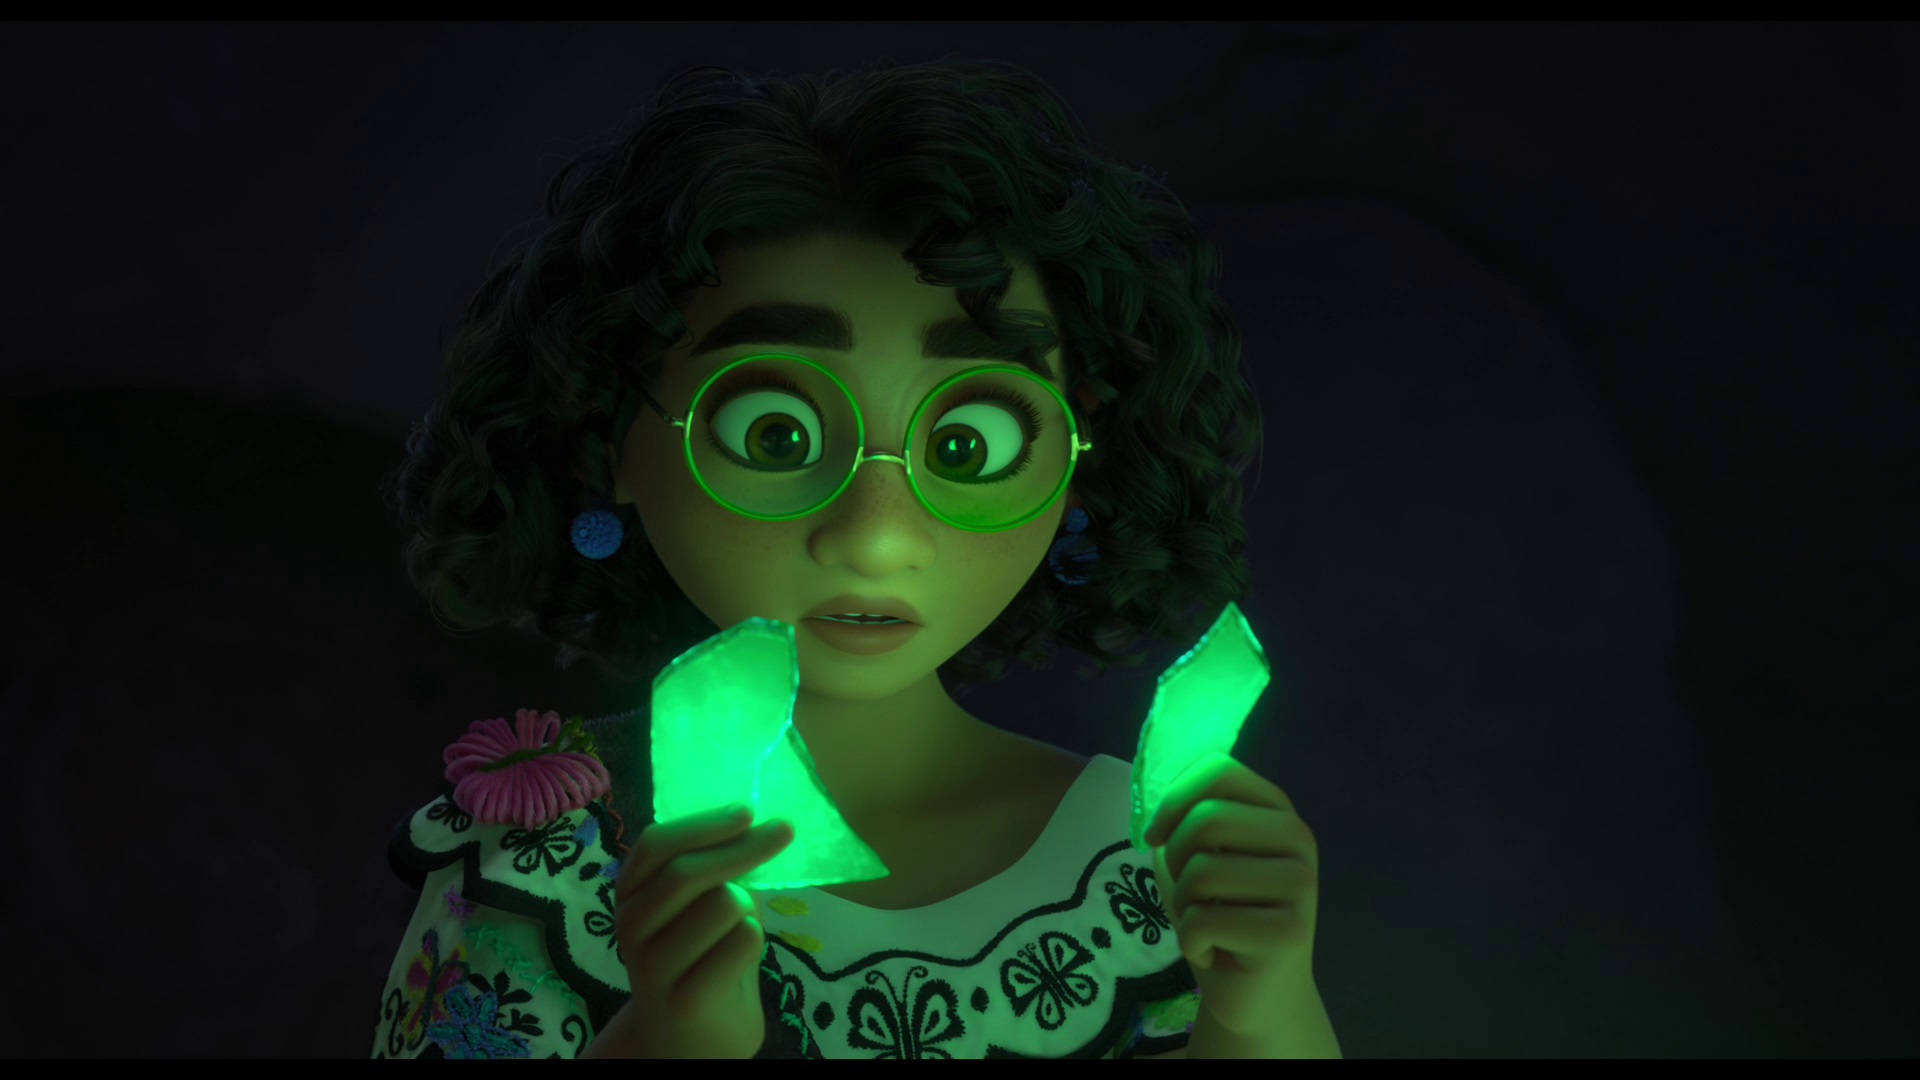 A Girl Holding A Glowing Green Crystal Wallpaper